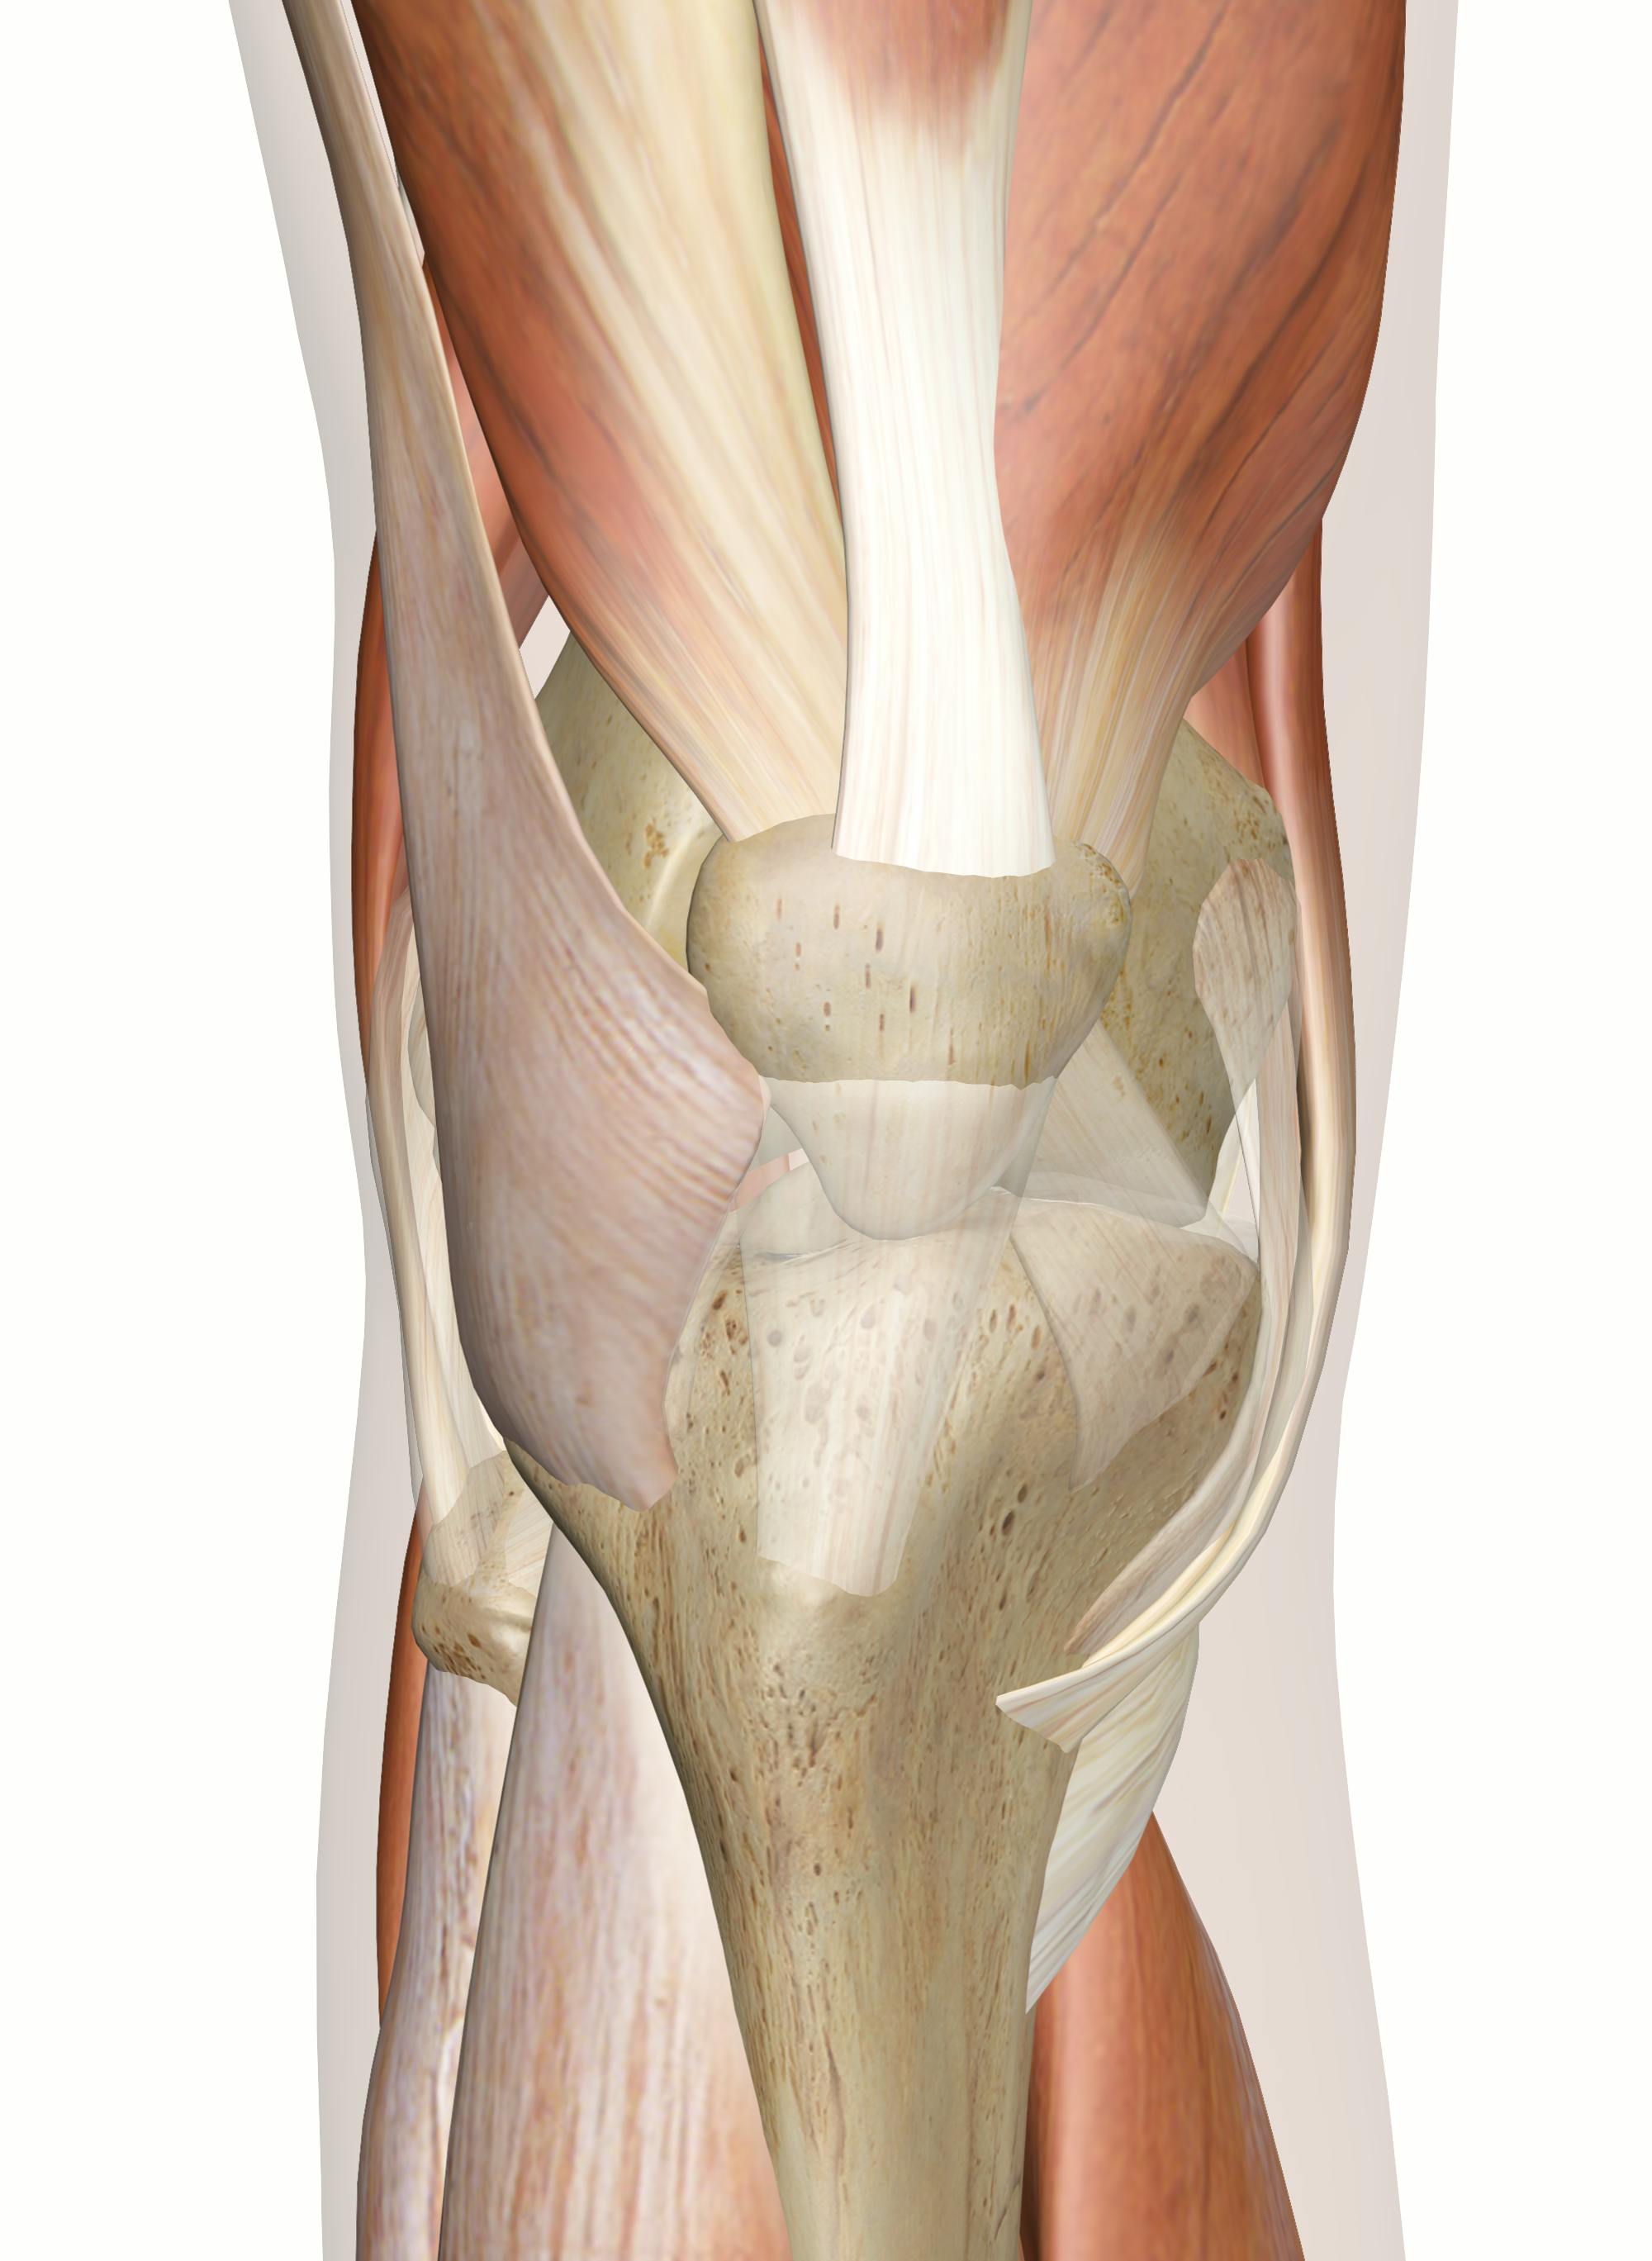 Muscles Of The Knee - Anatomy Pictures And Information